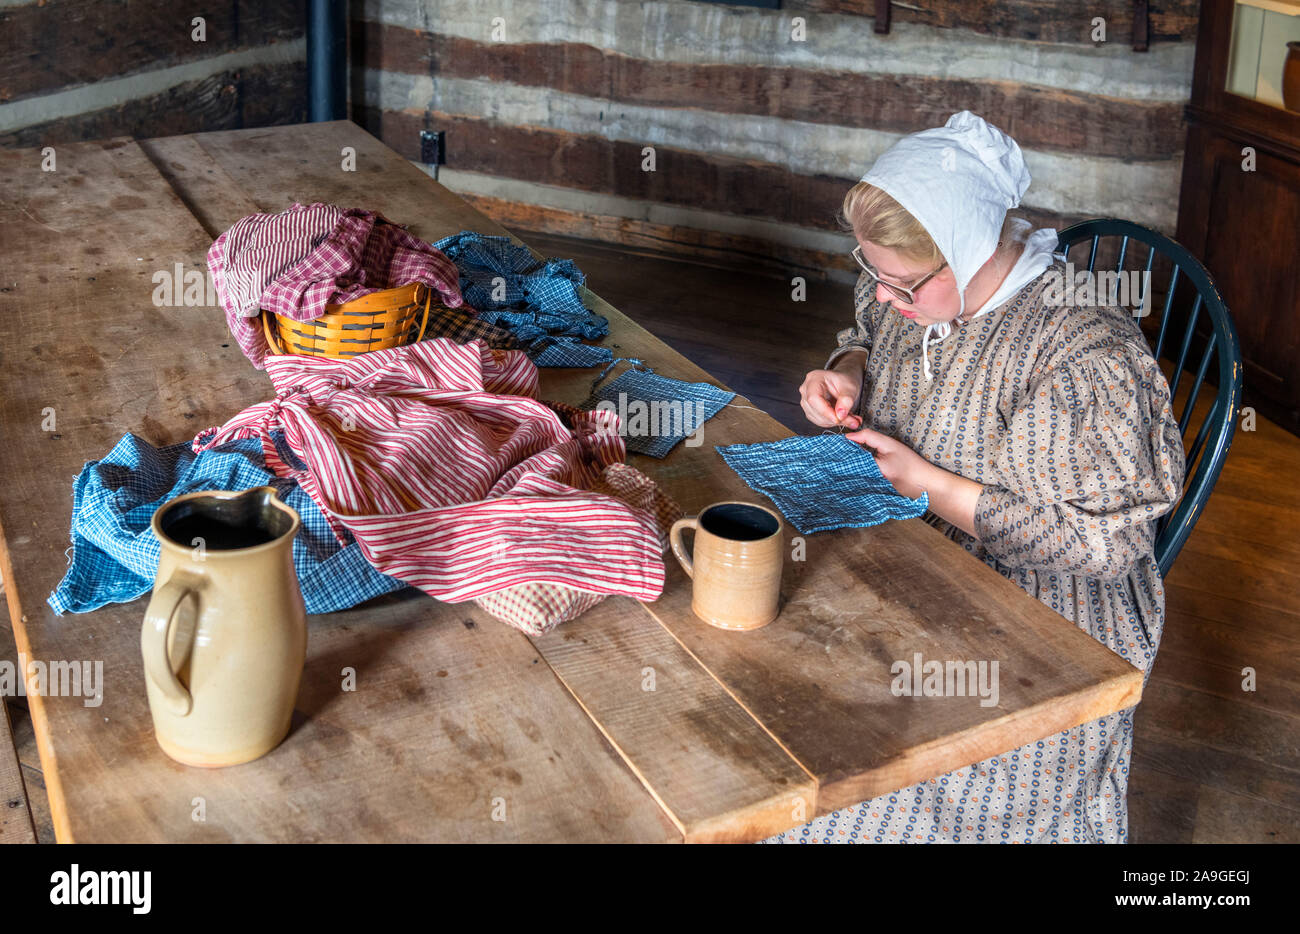 Re-enactor, in early 19th century dress, sewing inside the Newcom Tavern, Carillon Historical Park, Dayton, Ohio, USA Stock Photo